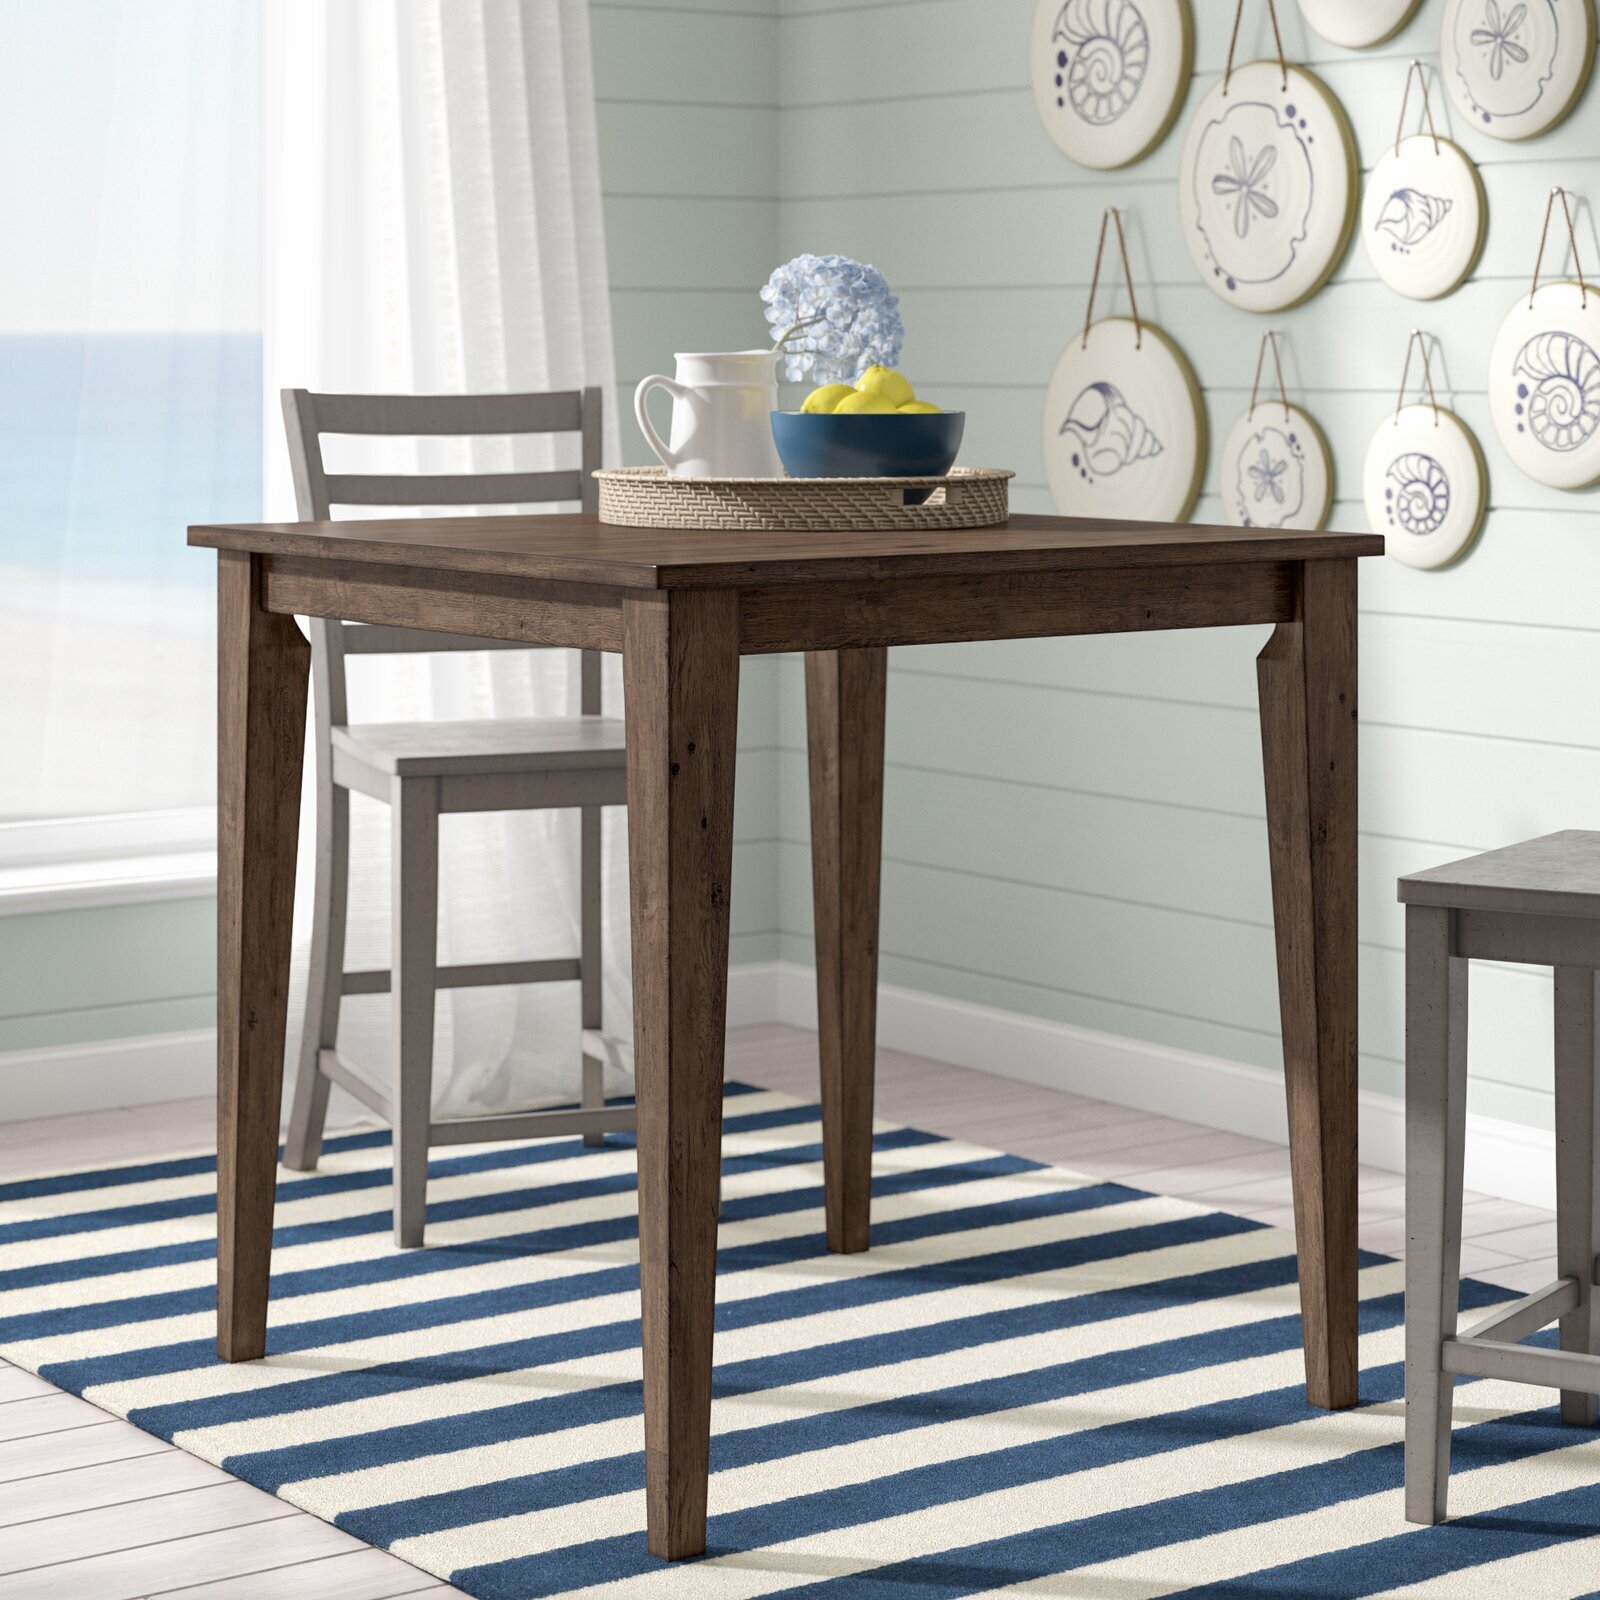 Counter height small kitchen table with coastal flair